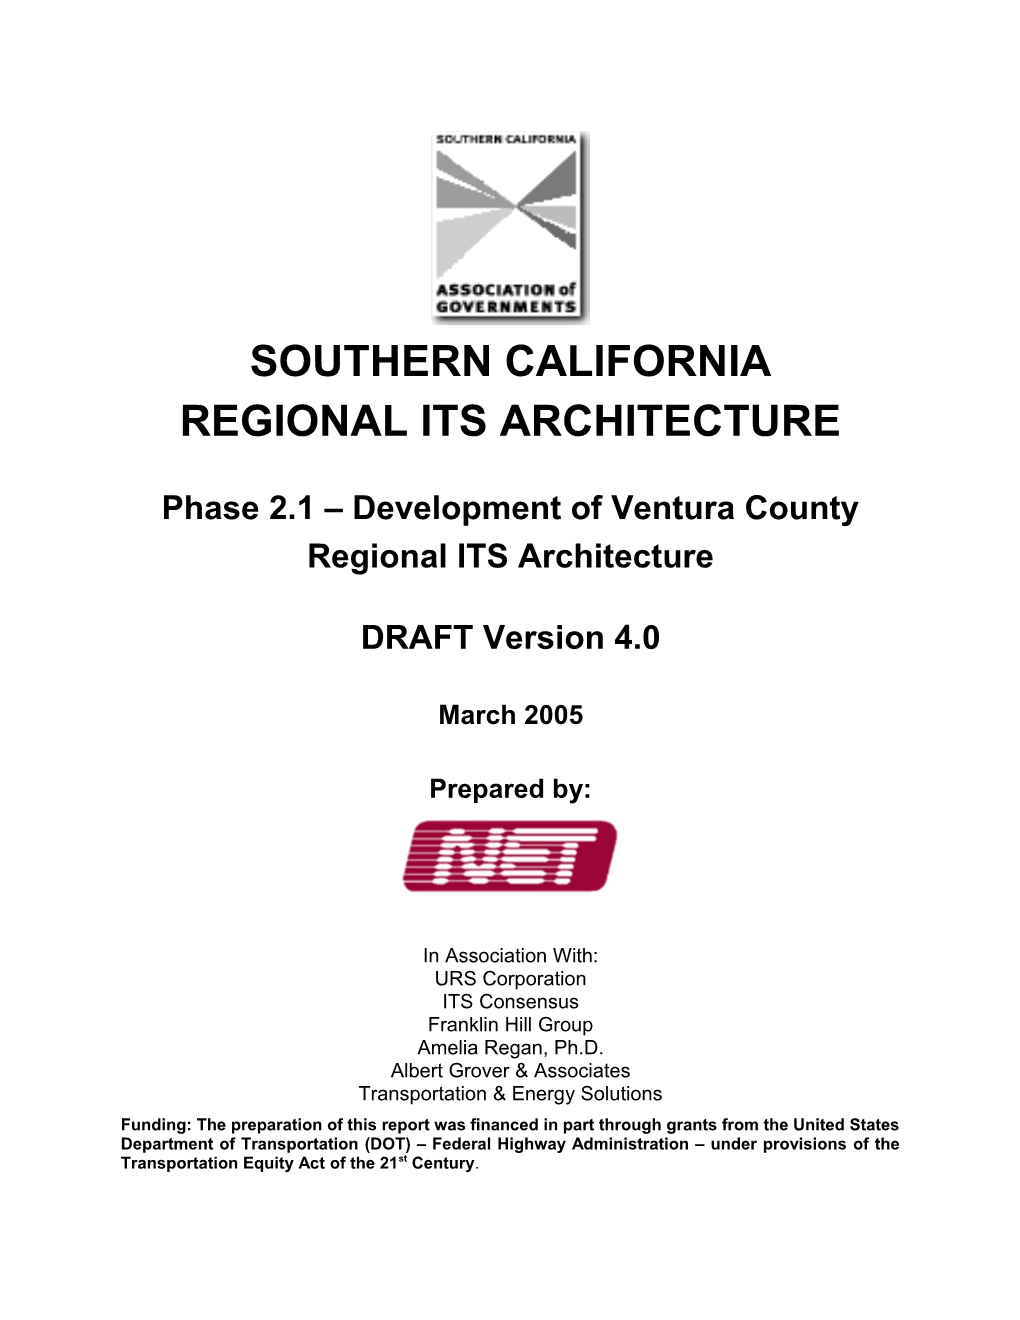 Ventura County ITS Architecture Final Draft (Ver. 4.0)